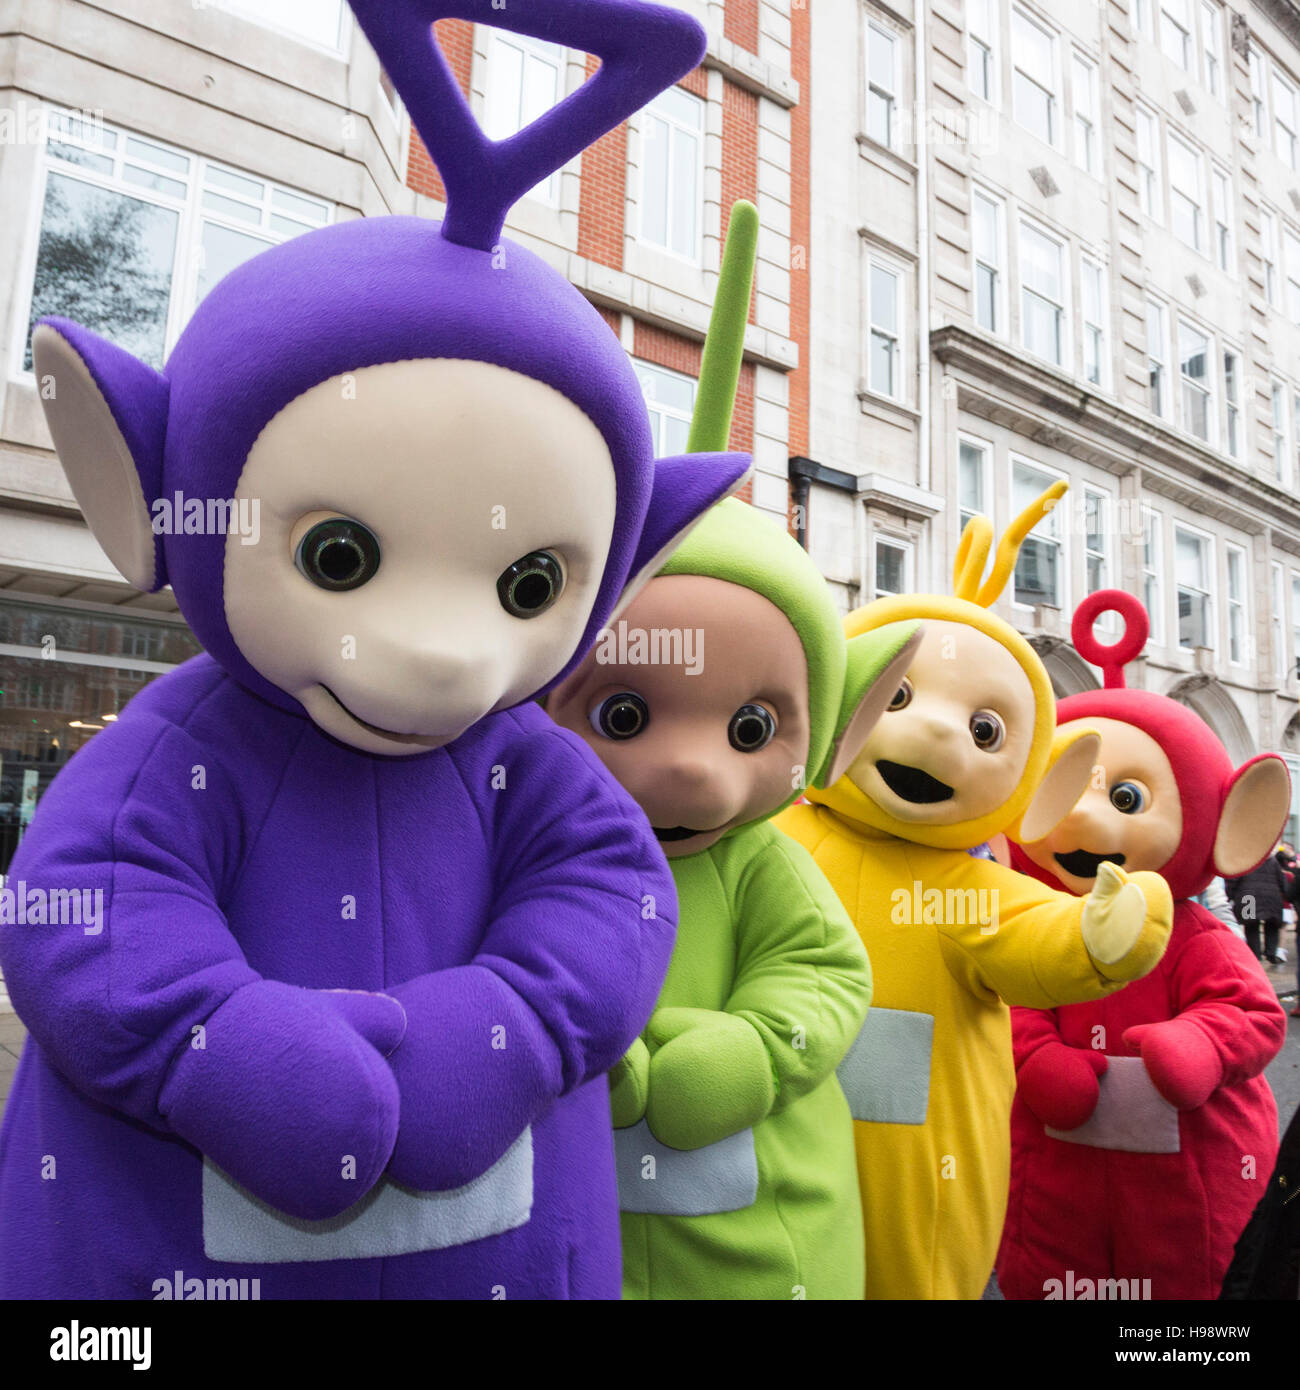 London, UK. 20 November 2016. Teletubbies on their way to the parade. The 2016 Hamleys Christmas Toy Parade takes place along Regent Street, which went traffic-free for the day. The parade organised by the world-famous toy store Hamleys featured over many of the nation's favourite children's characters along with entertainers, a marching band and giant balloons. The parade is modelled on Macy's annual Thanksgiving Parade in New York. Credit:  Bettina Strenske/Alamy Live News Stock Photo